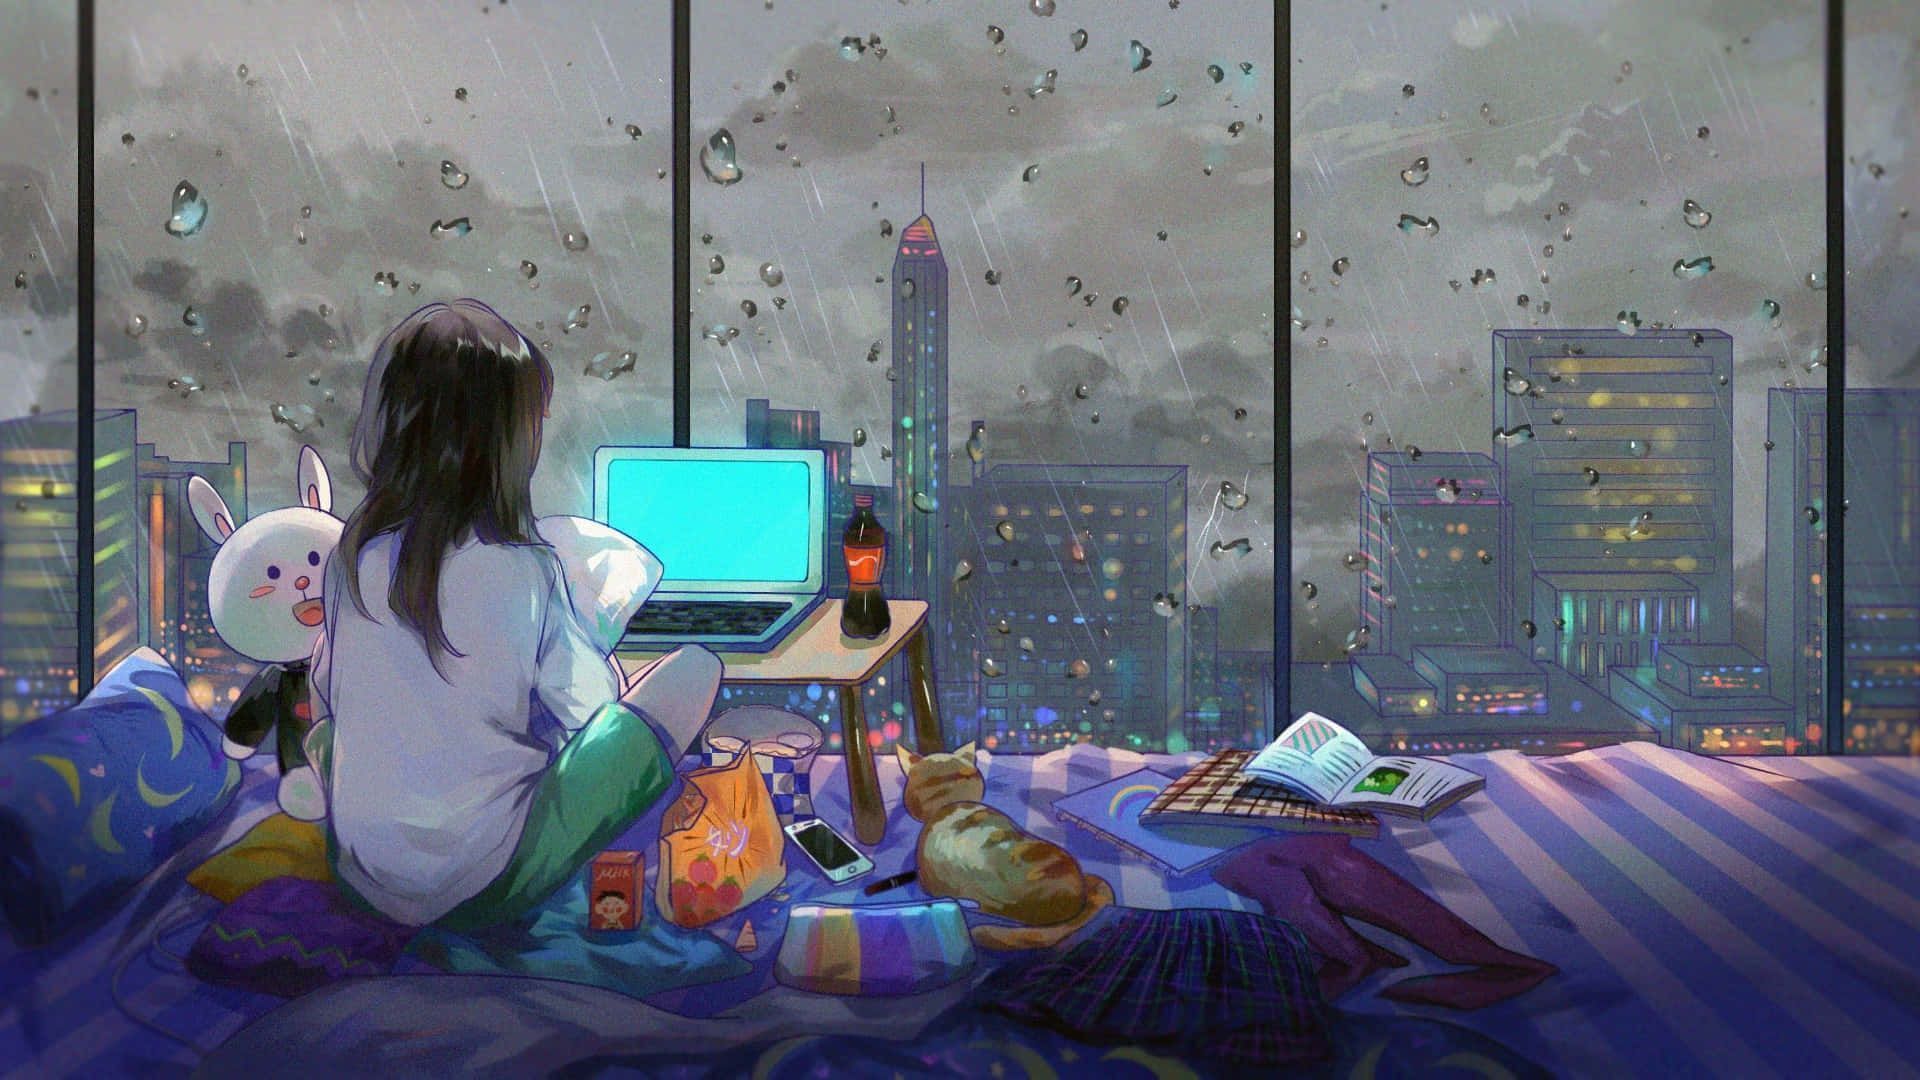 A woman sitting on a bed with a cat, a teddy bear, a book, a laptop, and a cup of tea - Anime girl, anime